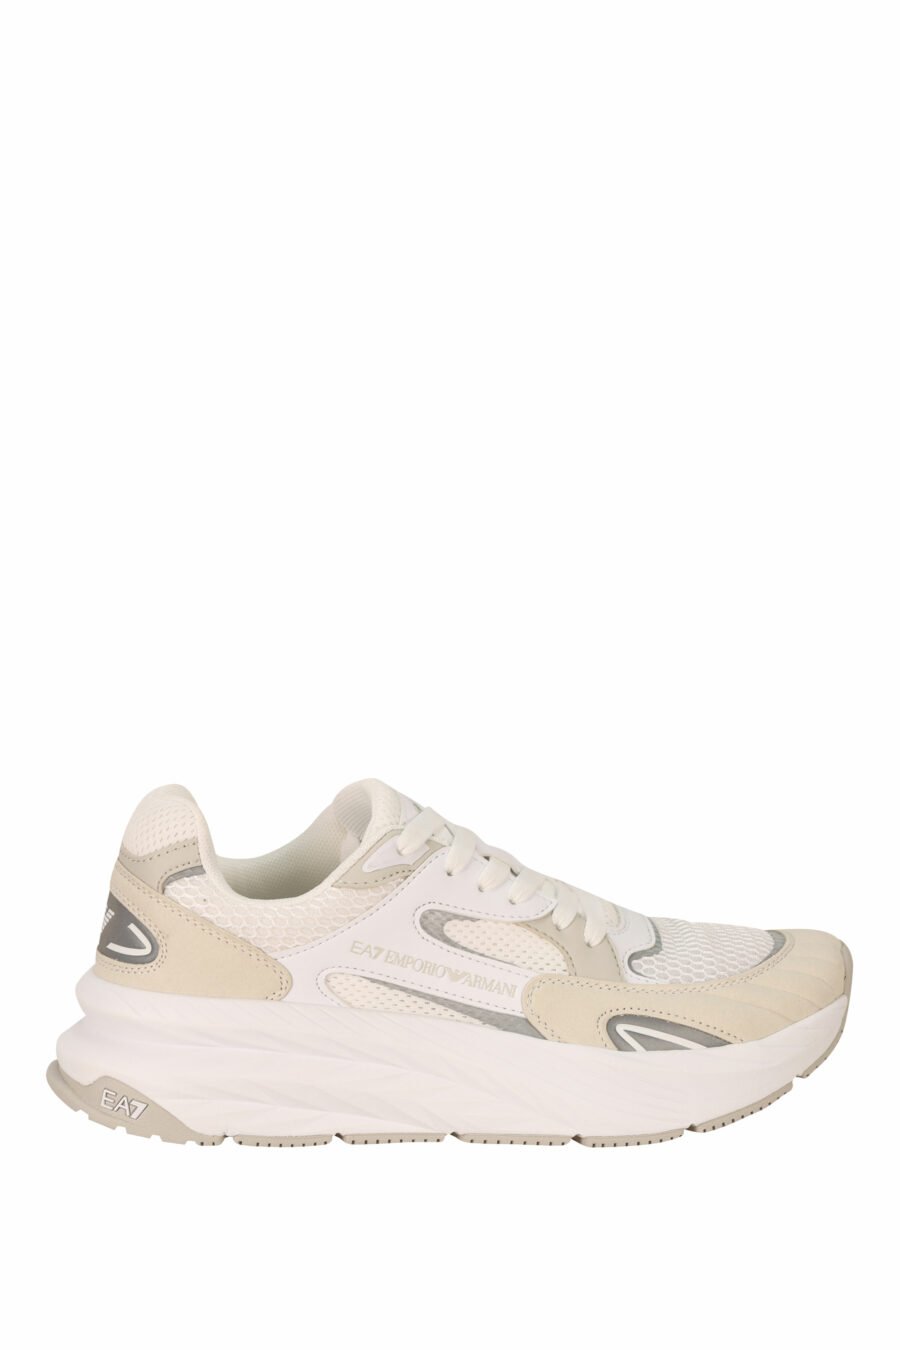 Beige and white mix trainers with beige minilogo - 8057970637271